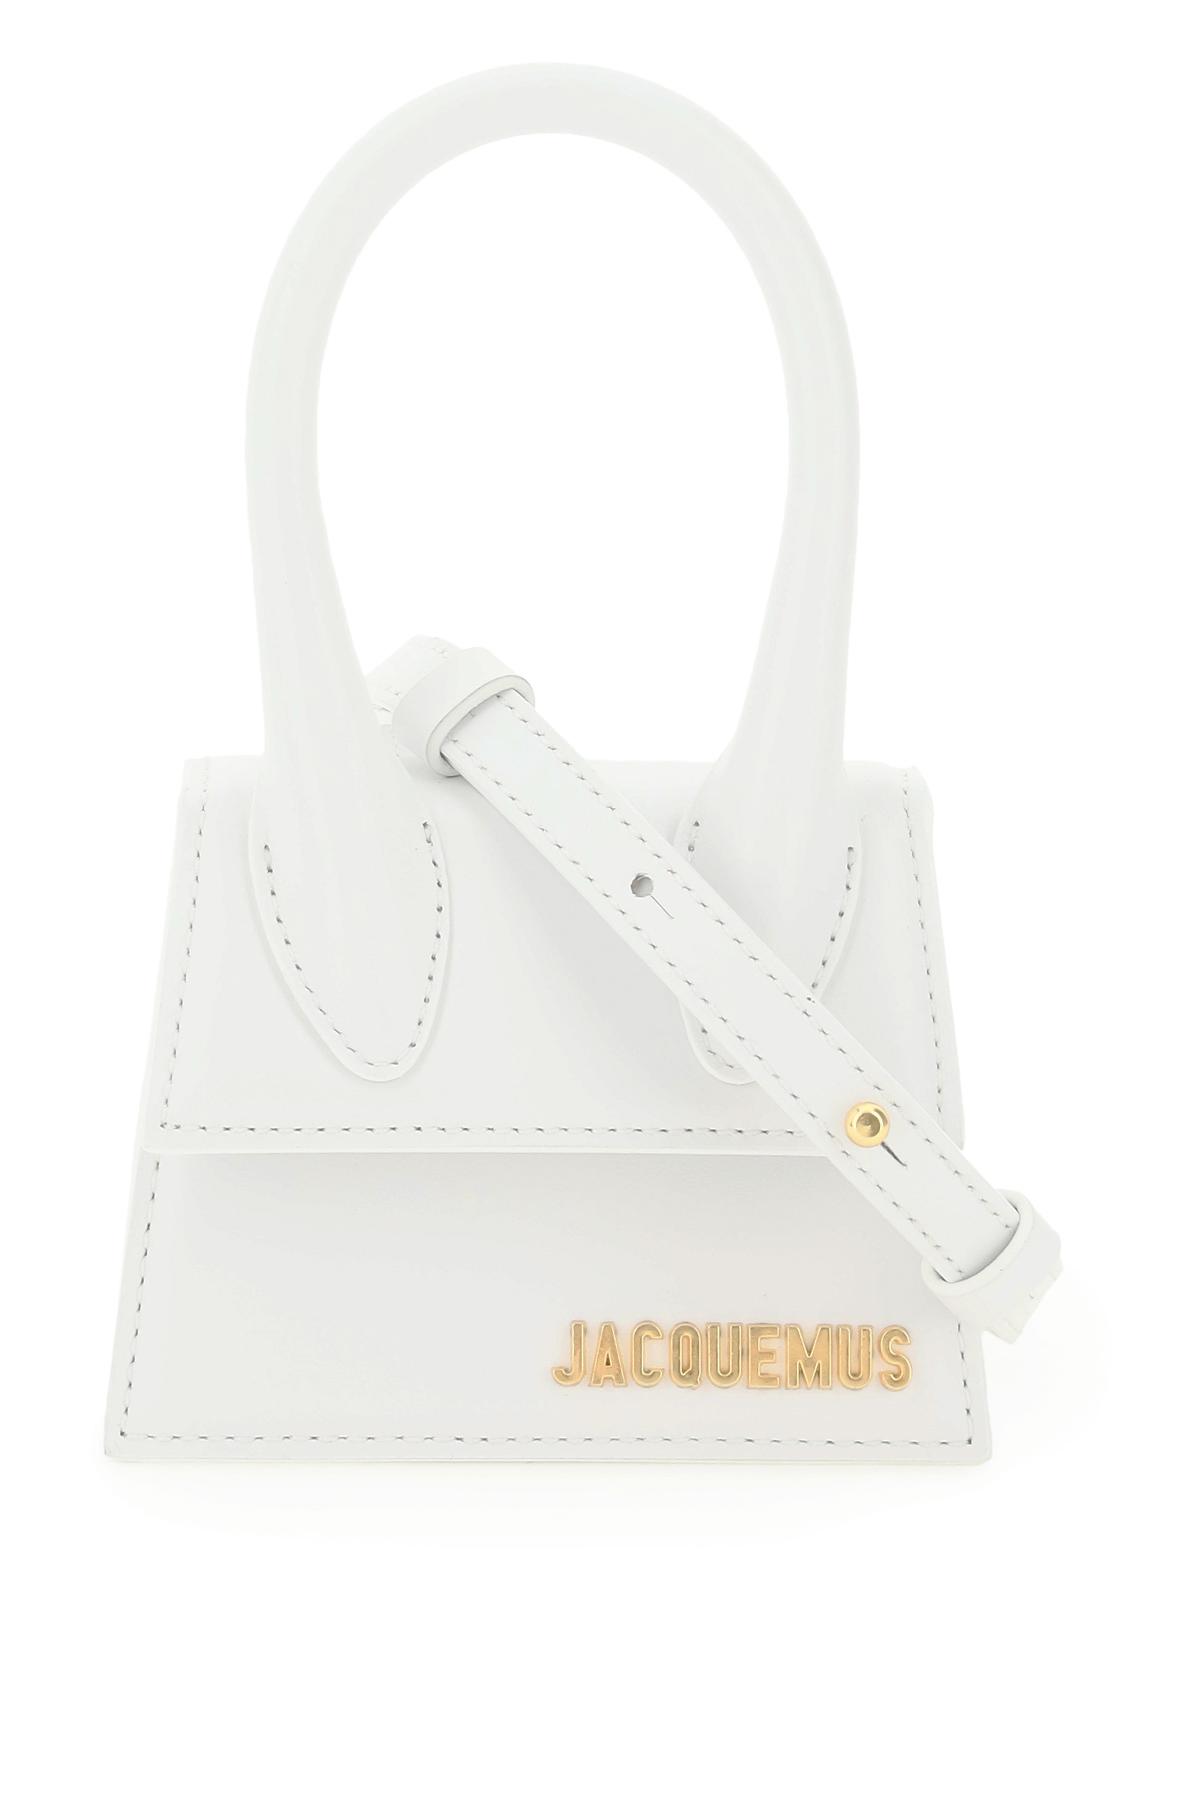 Jacquemus 'le Chiquito' Micro Bag in White | Lyst